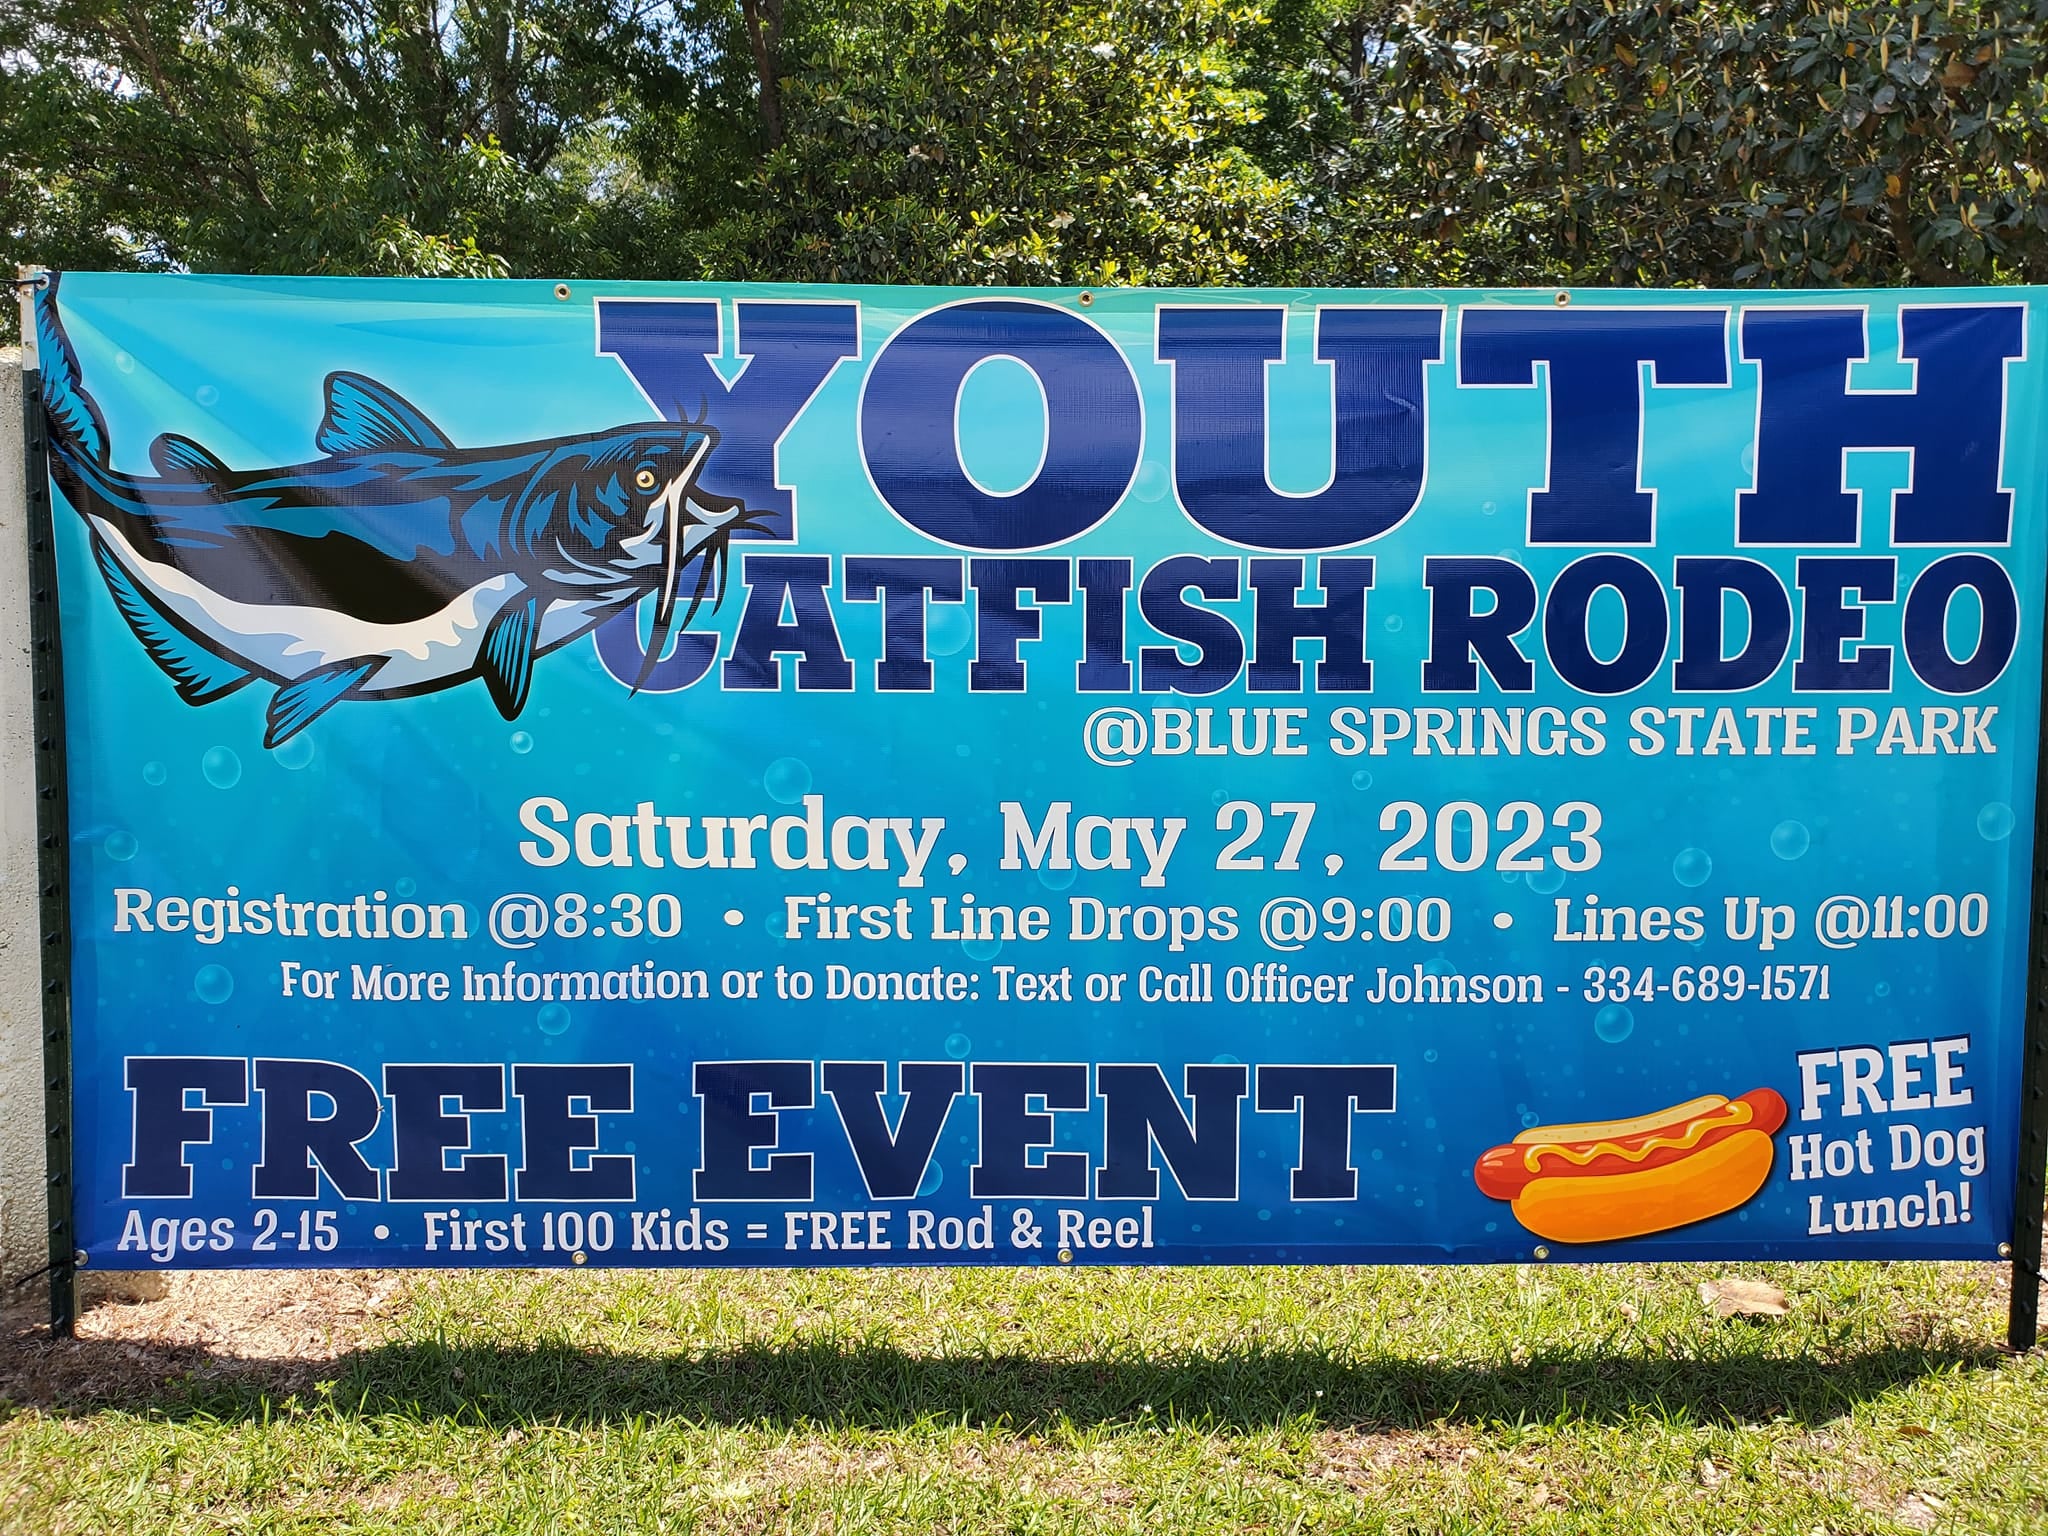 Blue Springs State Park Catfish Rodeo